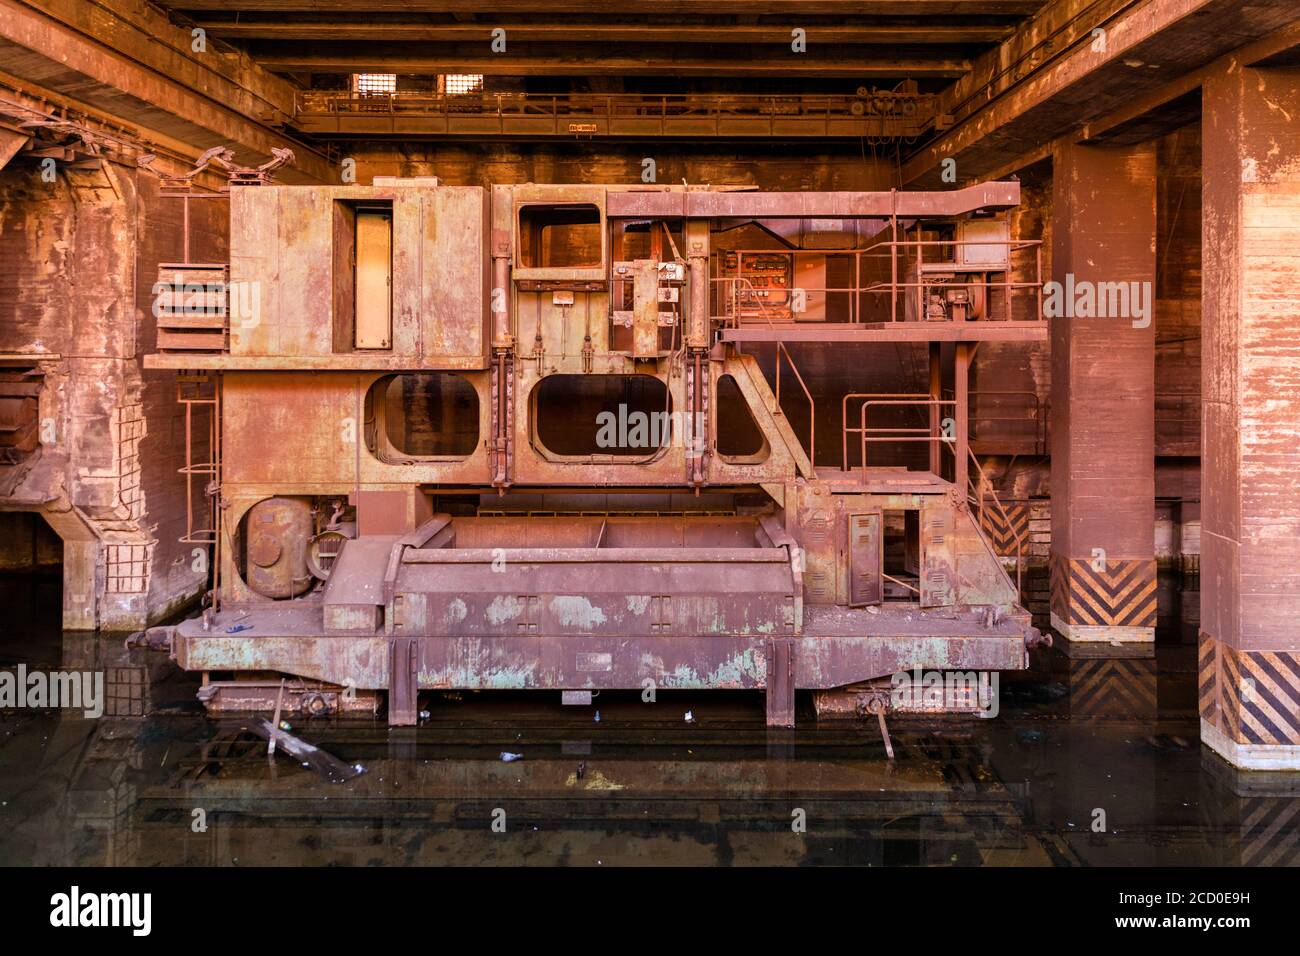 Industrial structures, Landschaftspark Duisburg-Nord, former ironworks and steel manufacturing, Ruhr, Germany Stock Photo